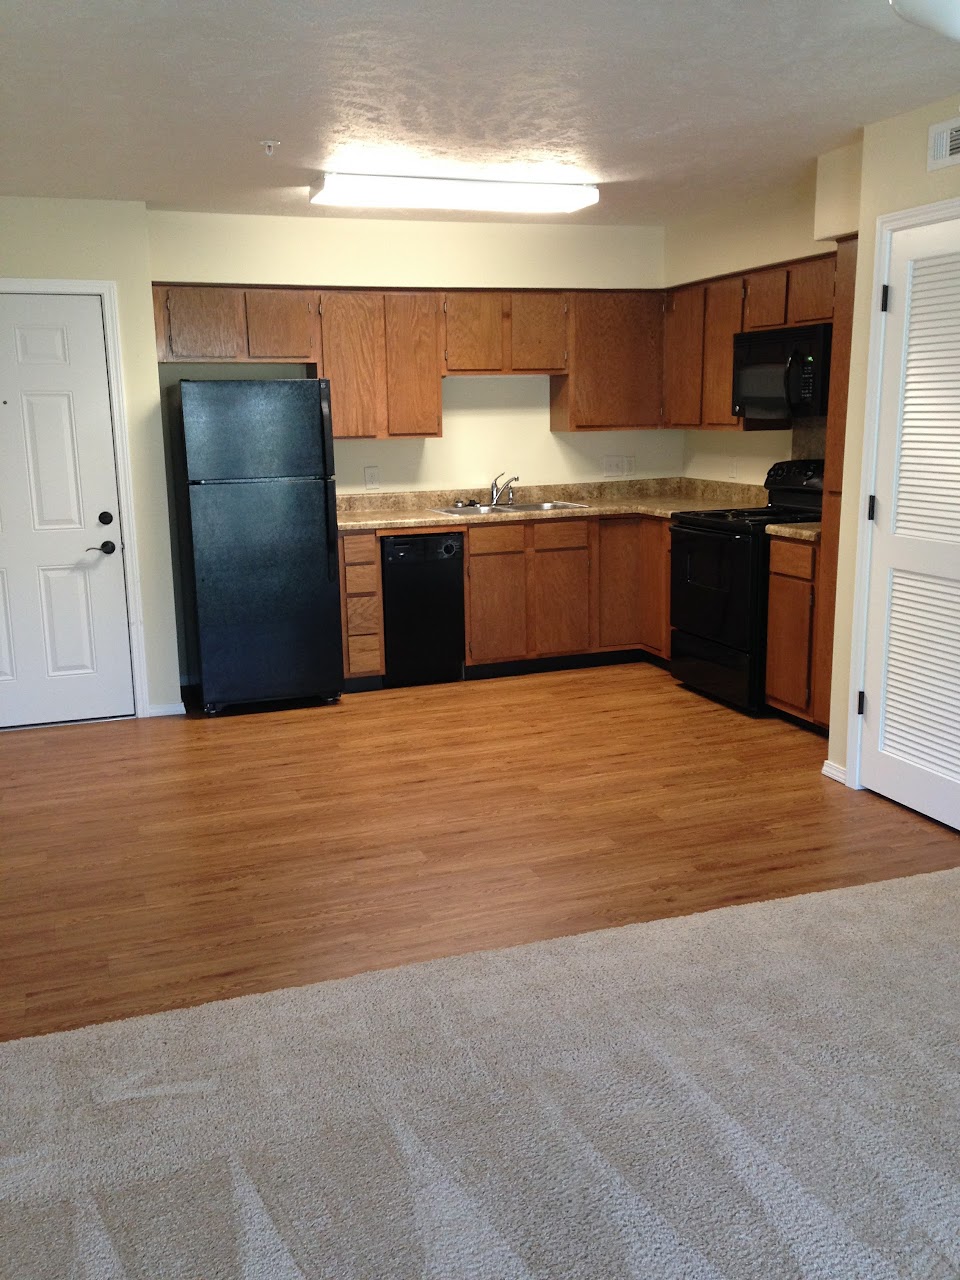 Photo of MAJESTIC VIEW APTS at 1628 MOUNTAIN VIEW DR HARRISON, AR 72601